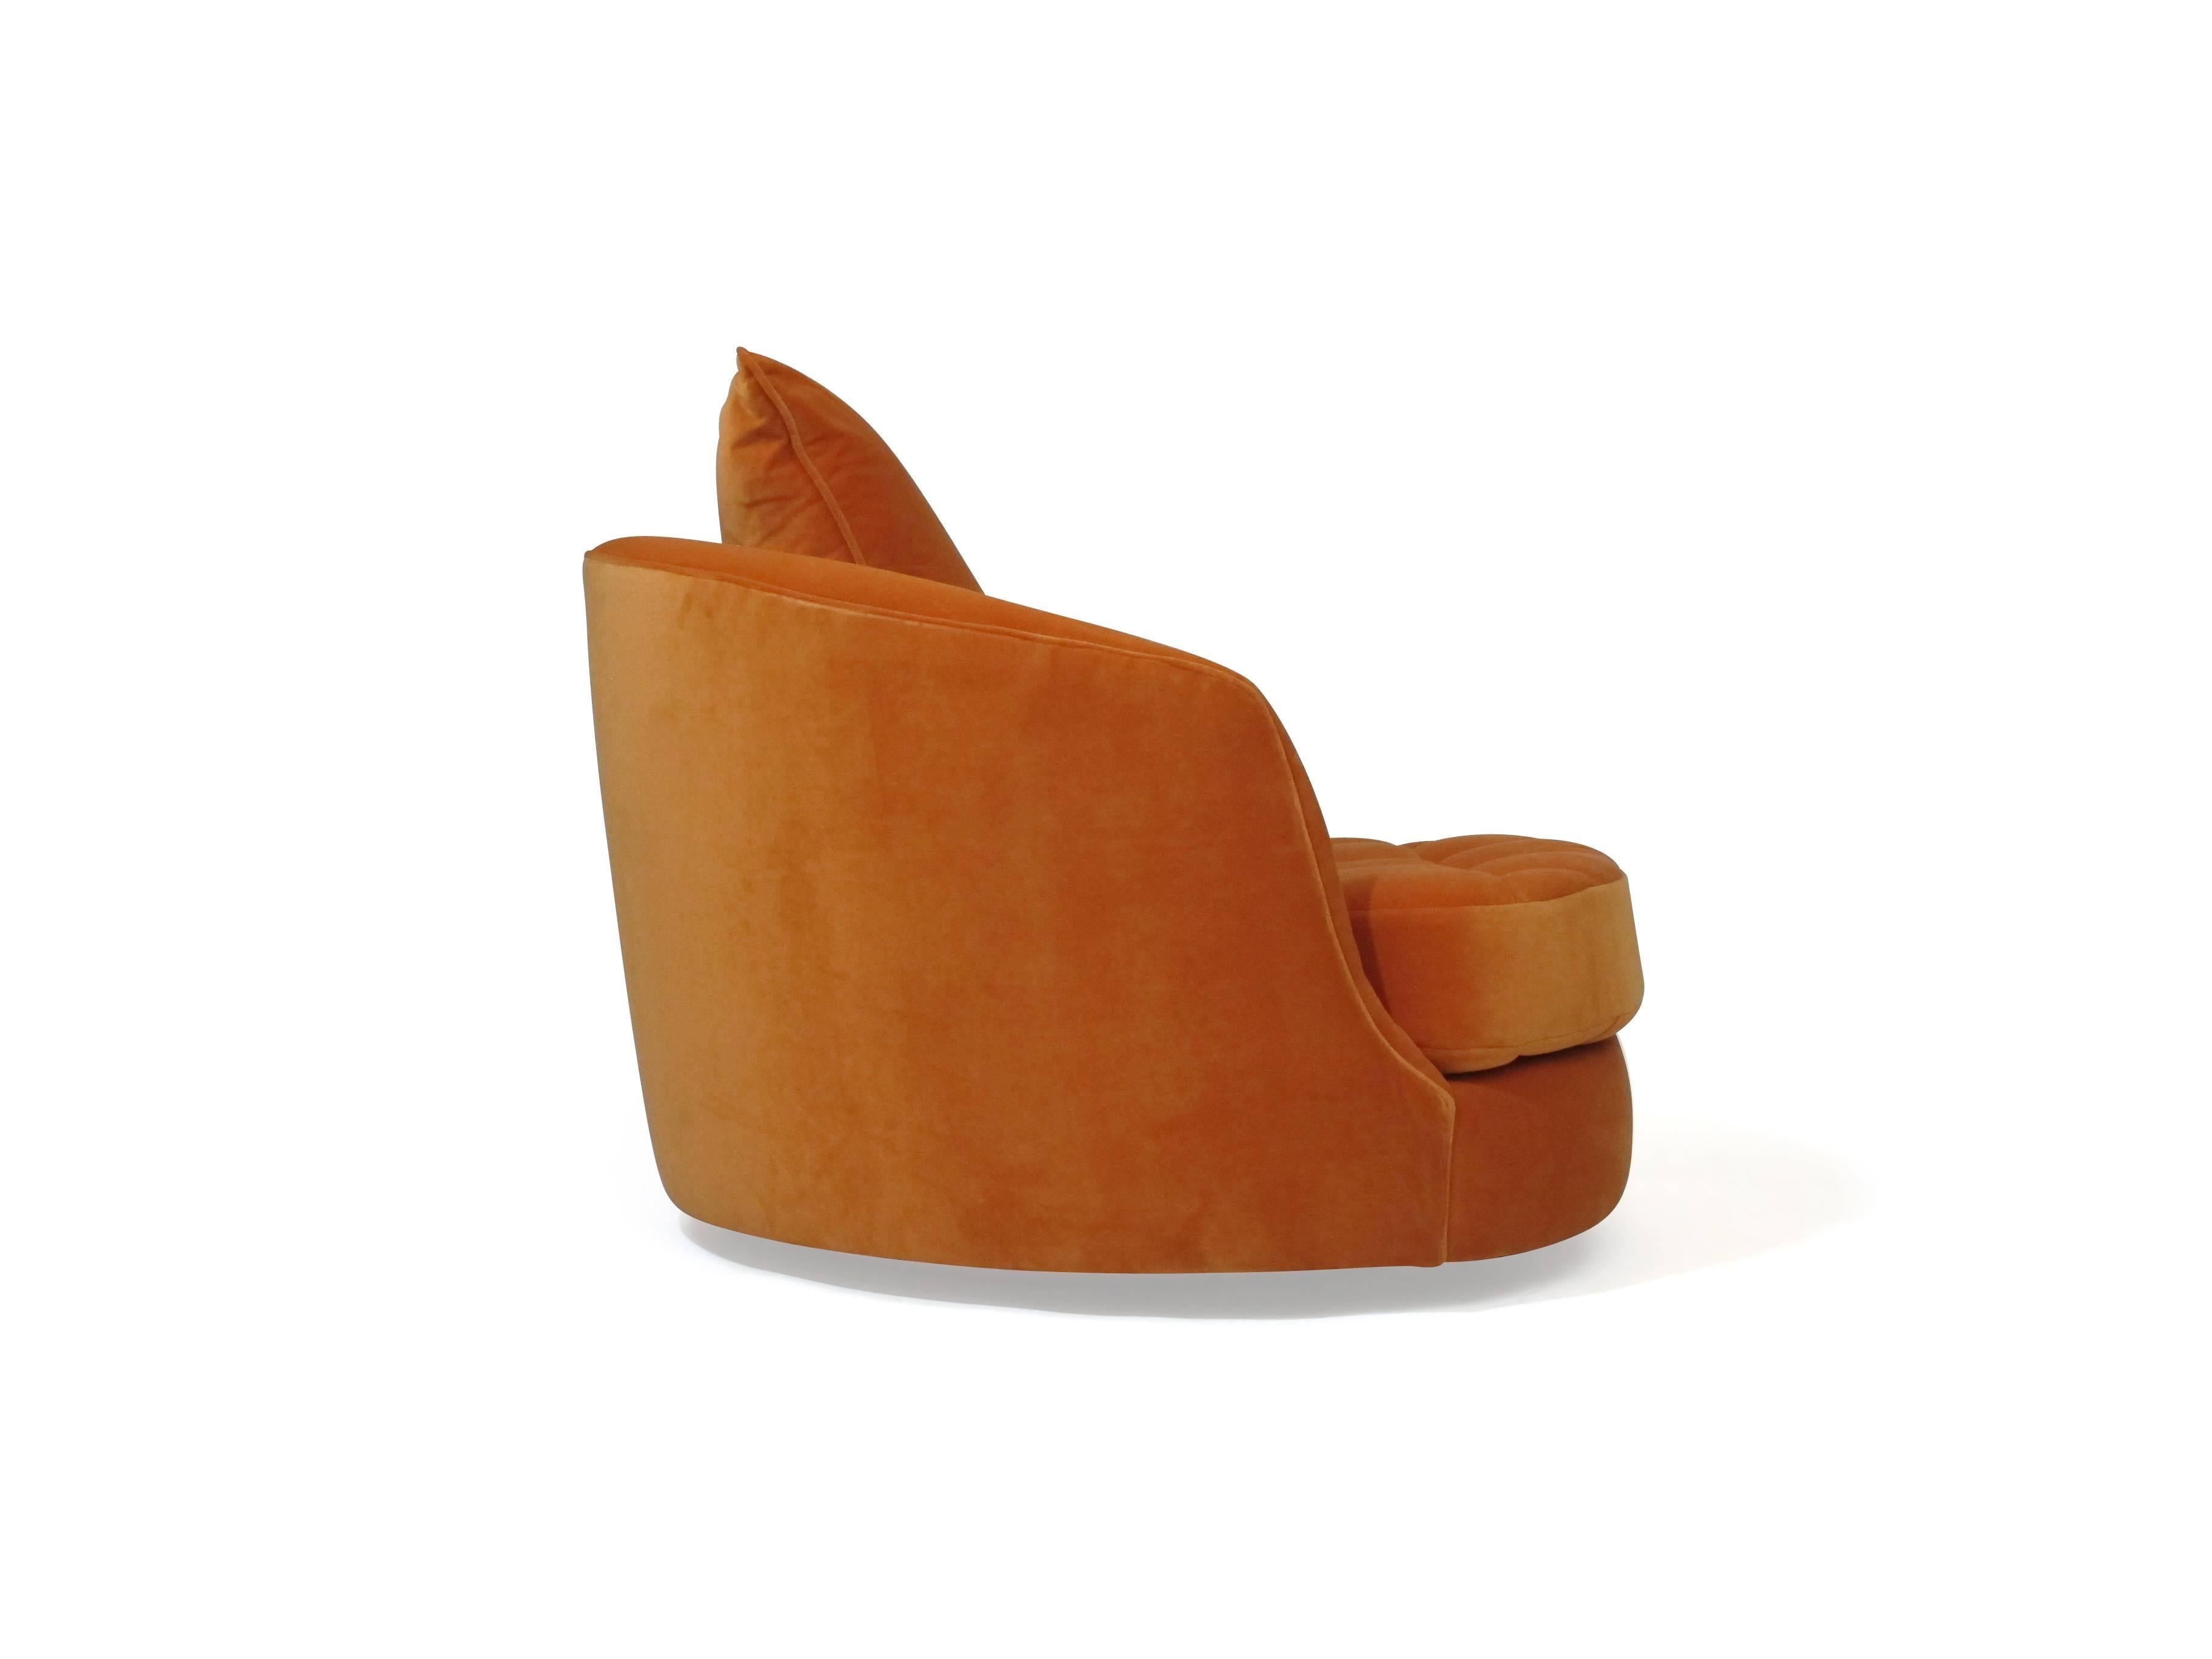 Mid-Century Modern Milo Baughman for Thayer Coggin Swivel Tub Chair Available in COM For Sale